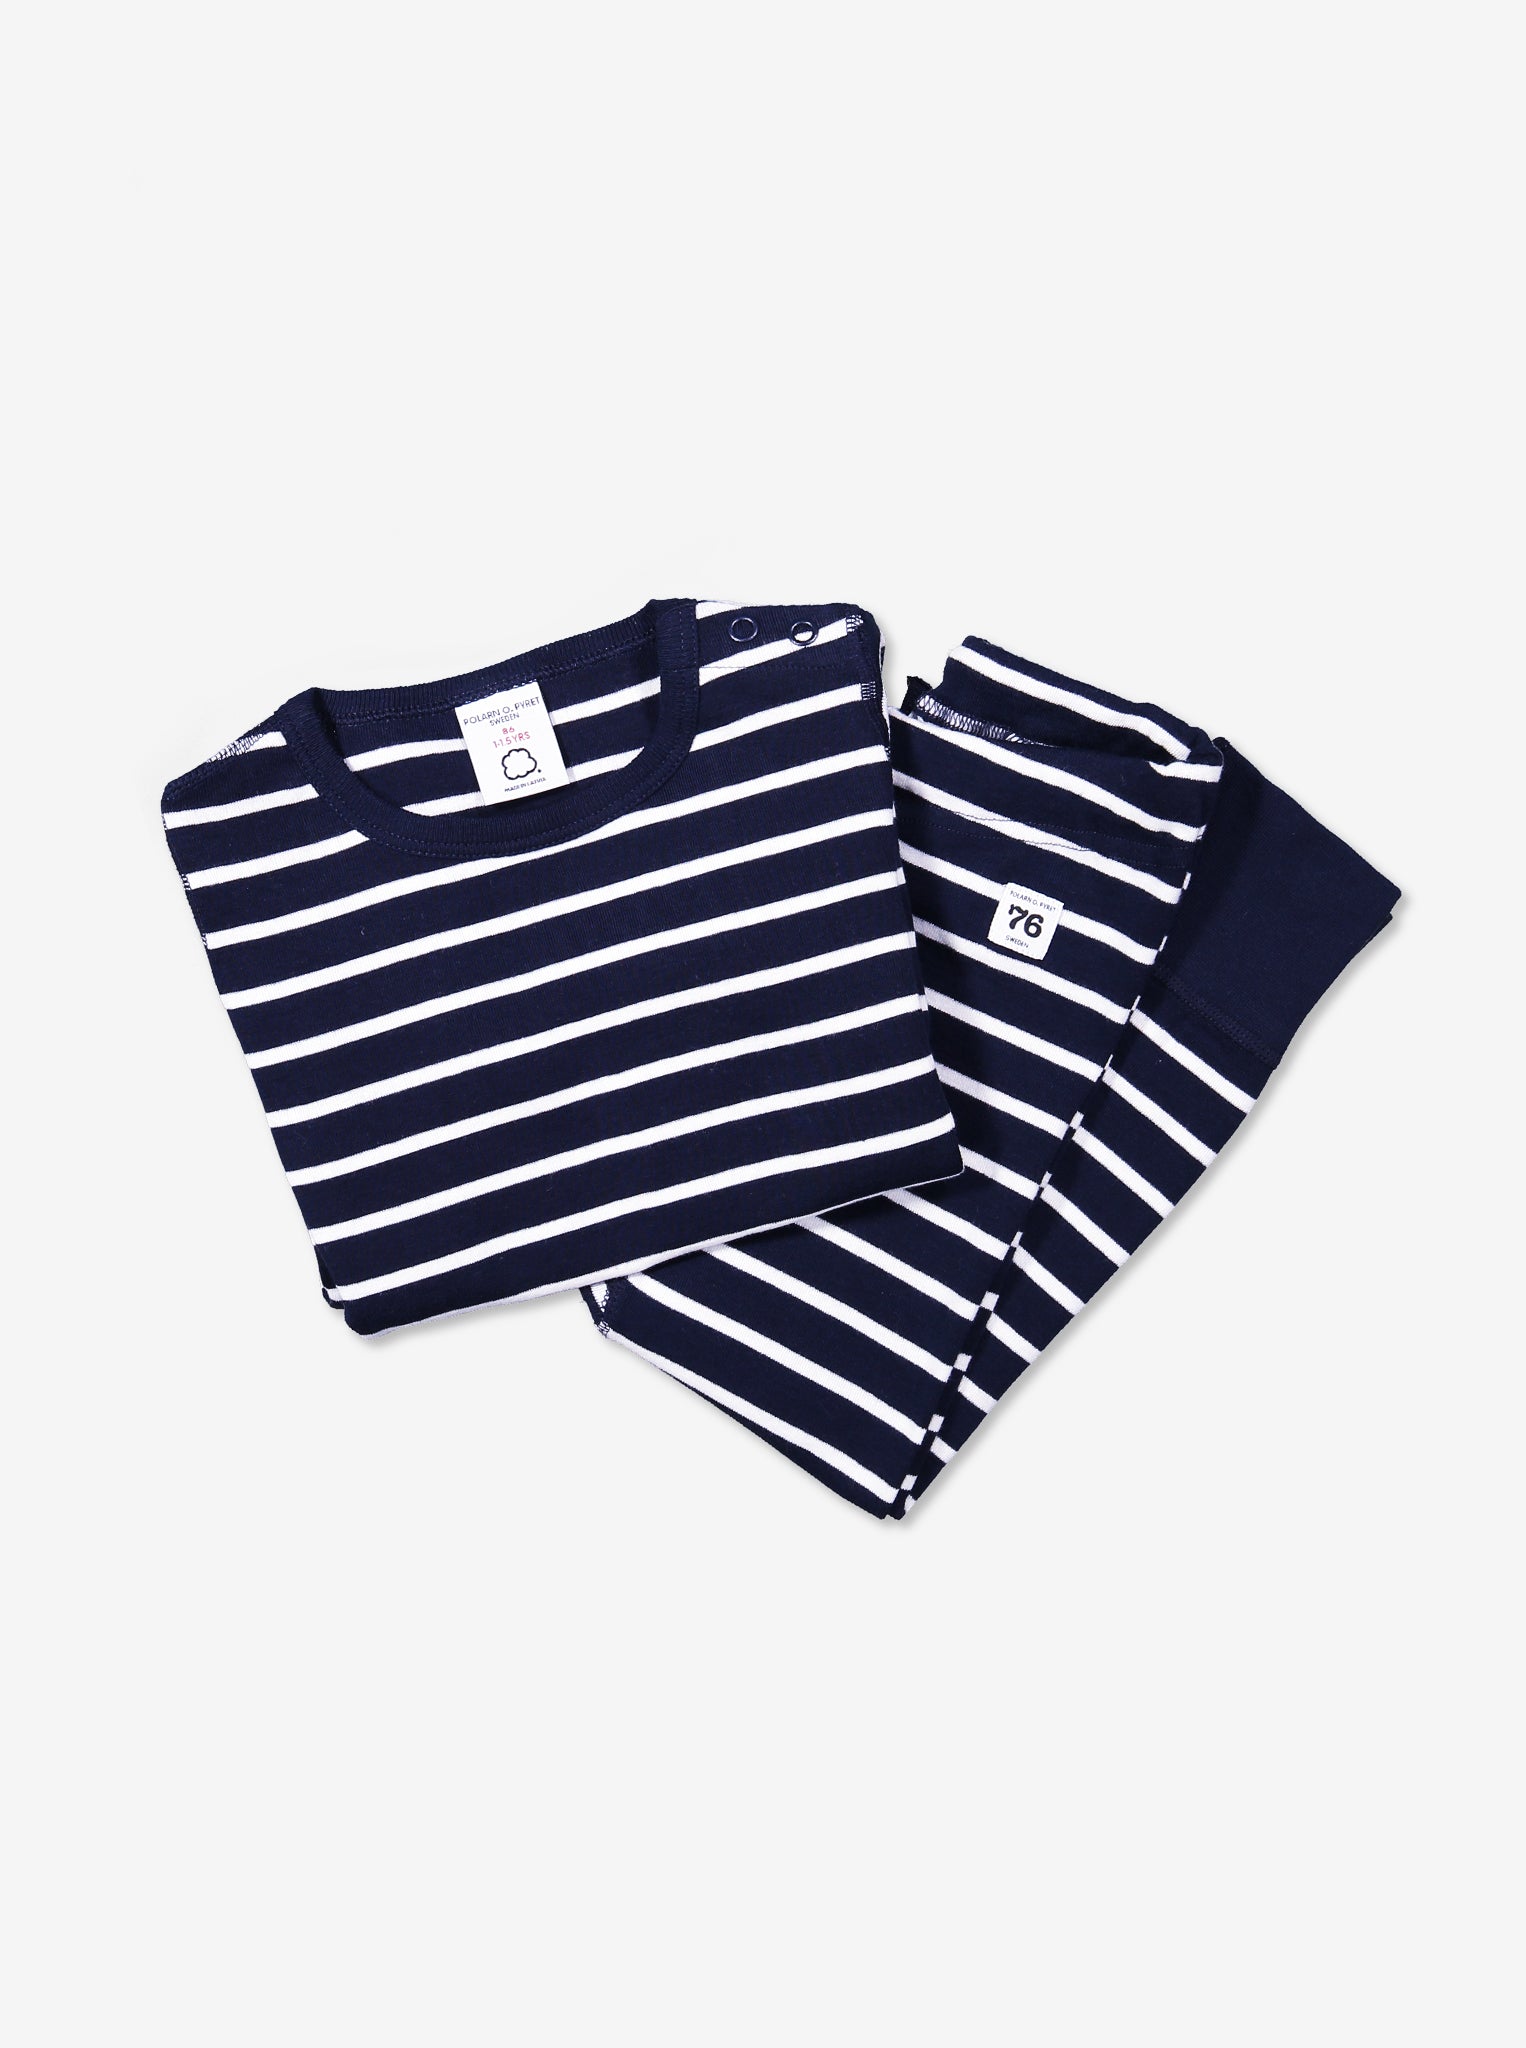 kids top and bottoms , navy white striped, organic cotton ethical quality polarn o. pyret